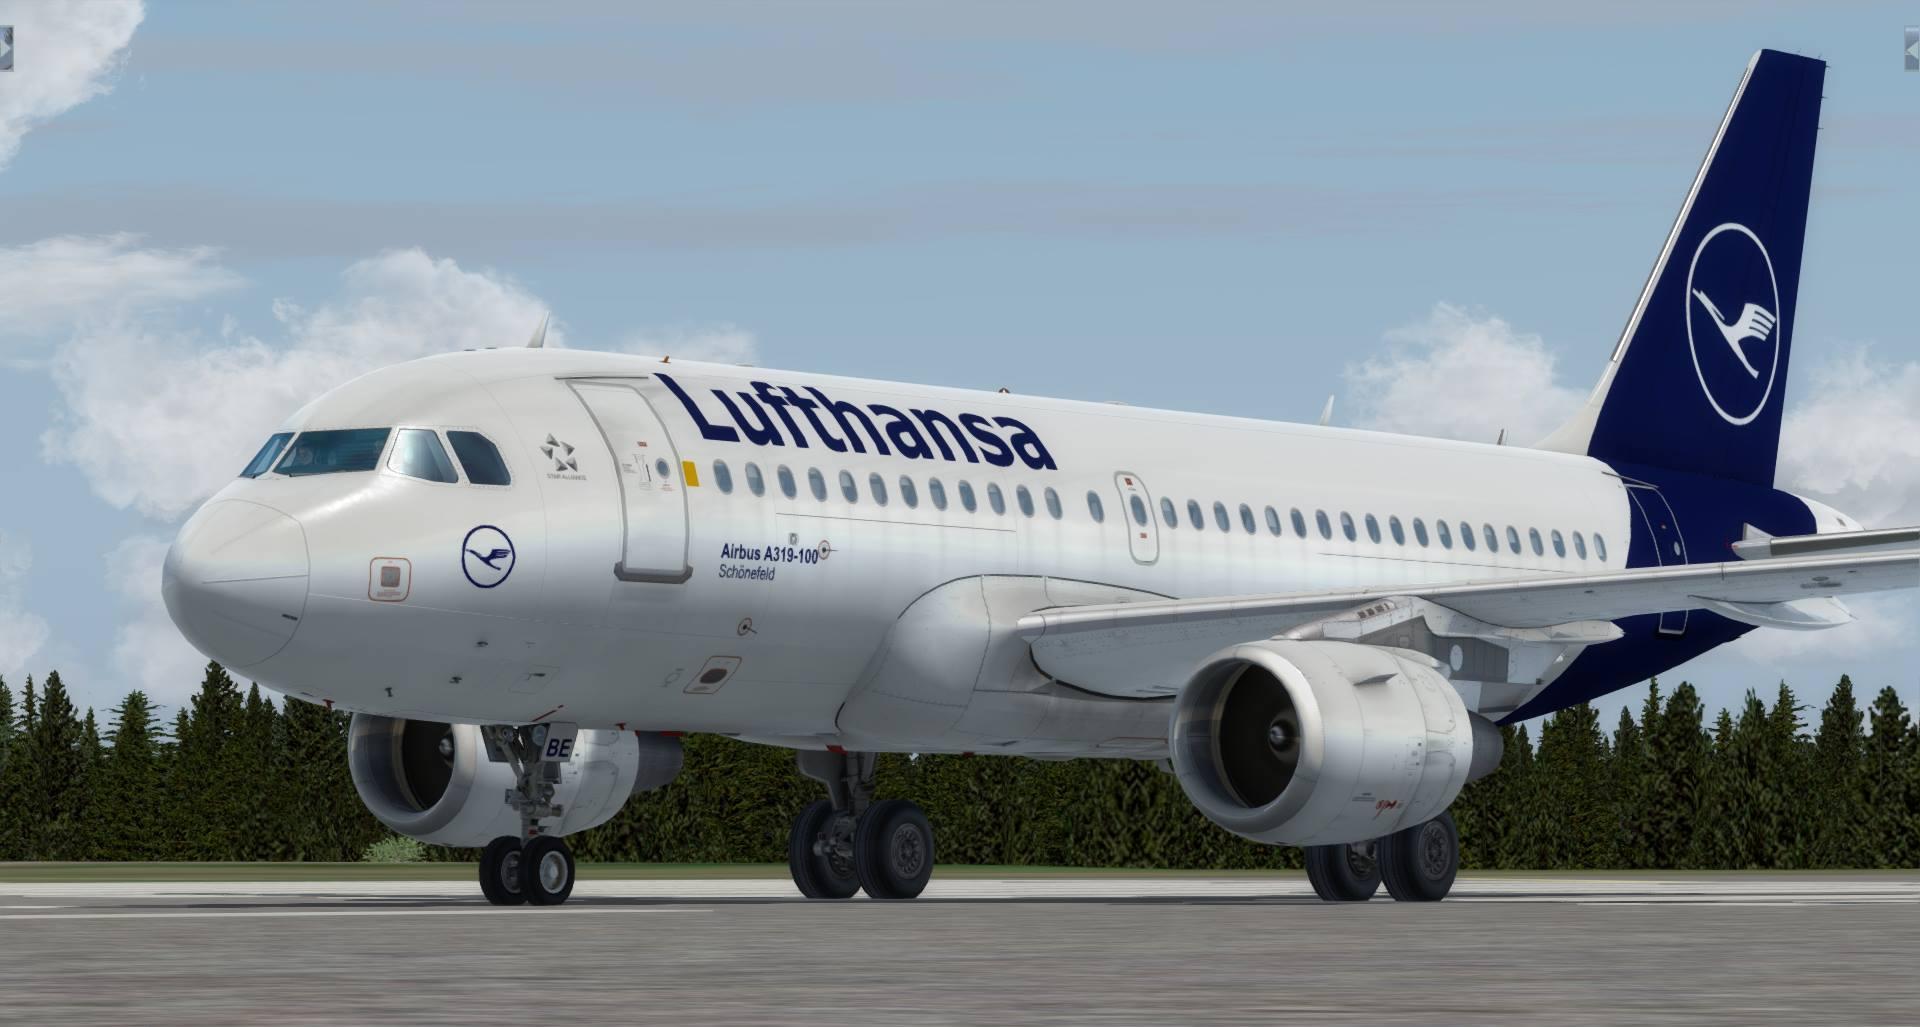 More information about "Airbus A319 Lufthansa (2018) D-AIBE"